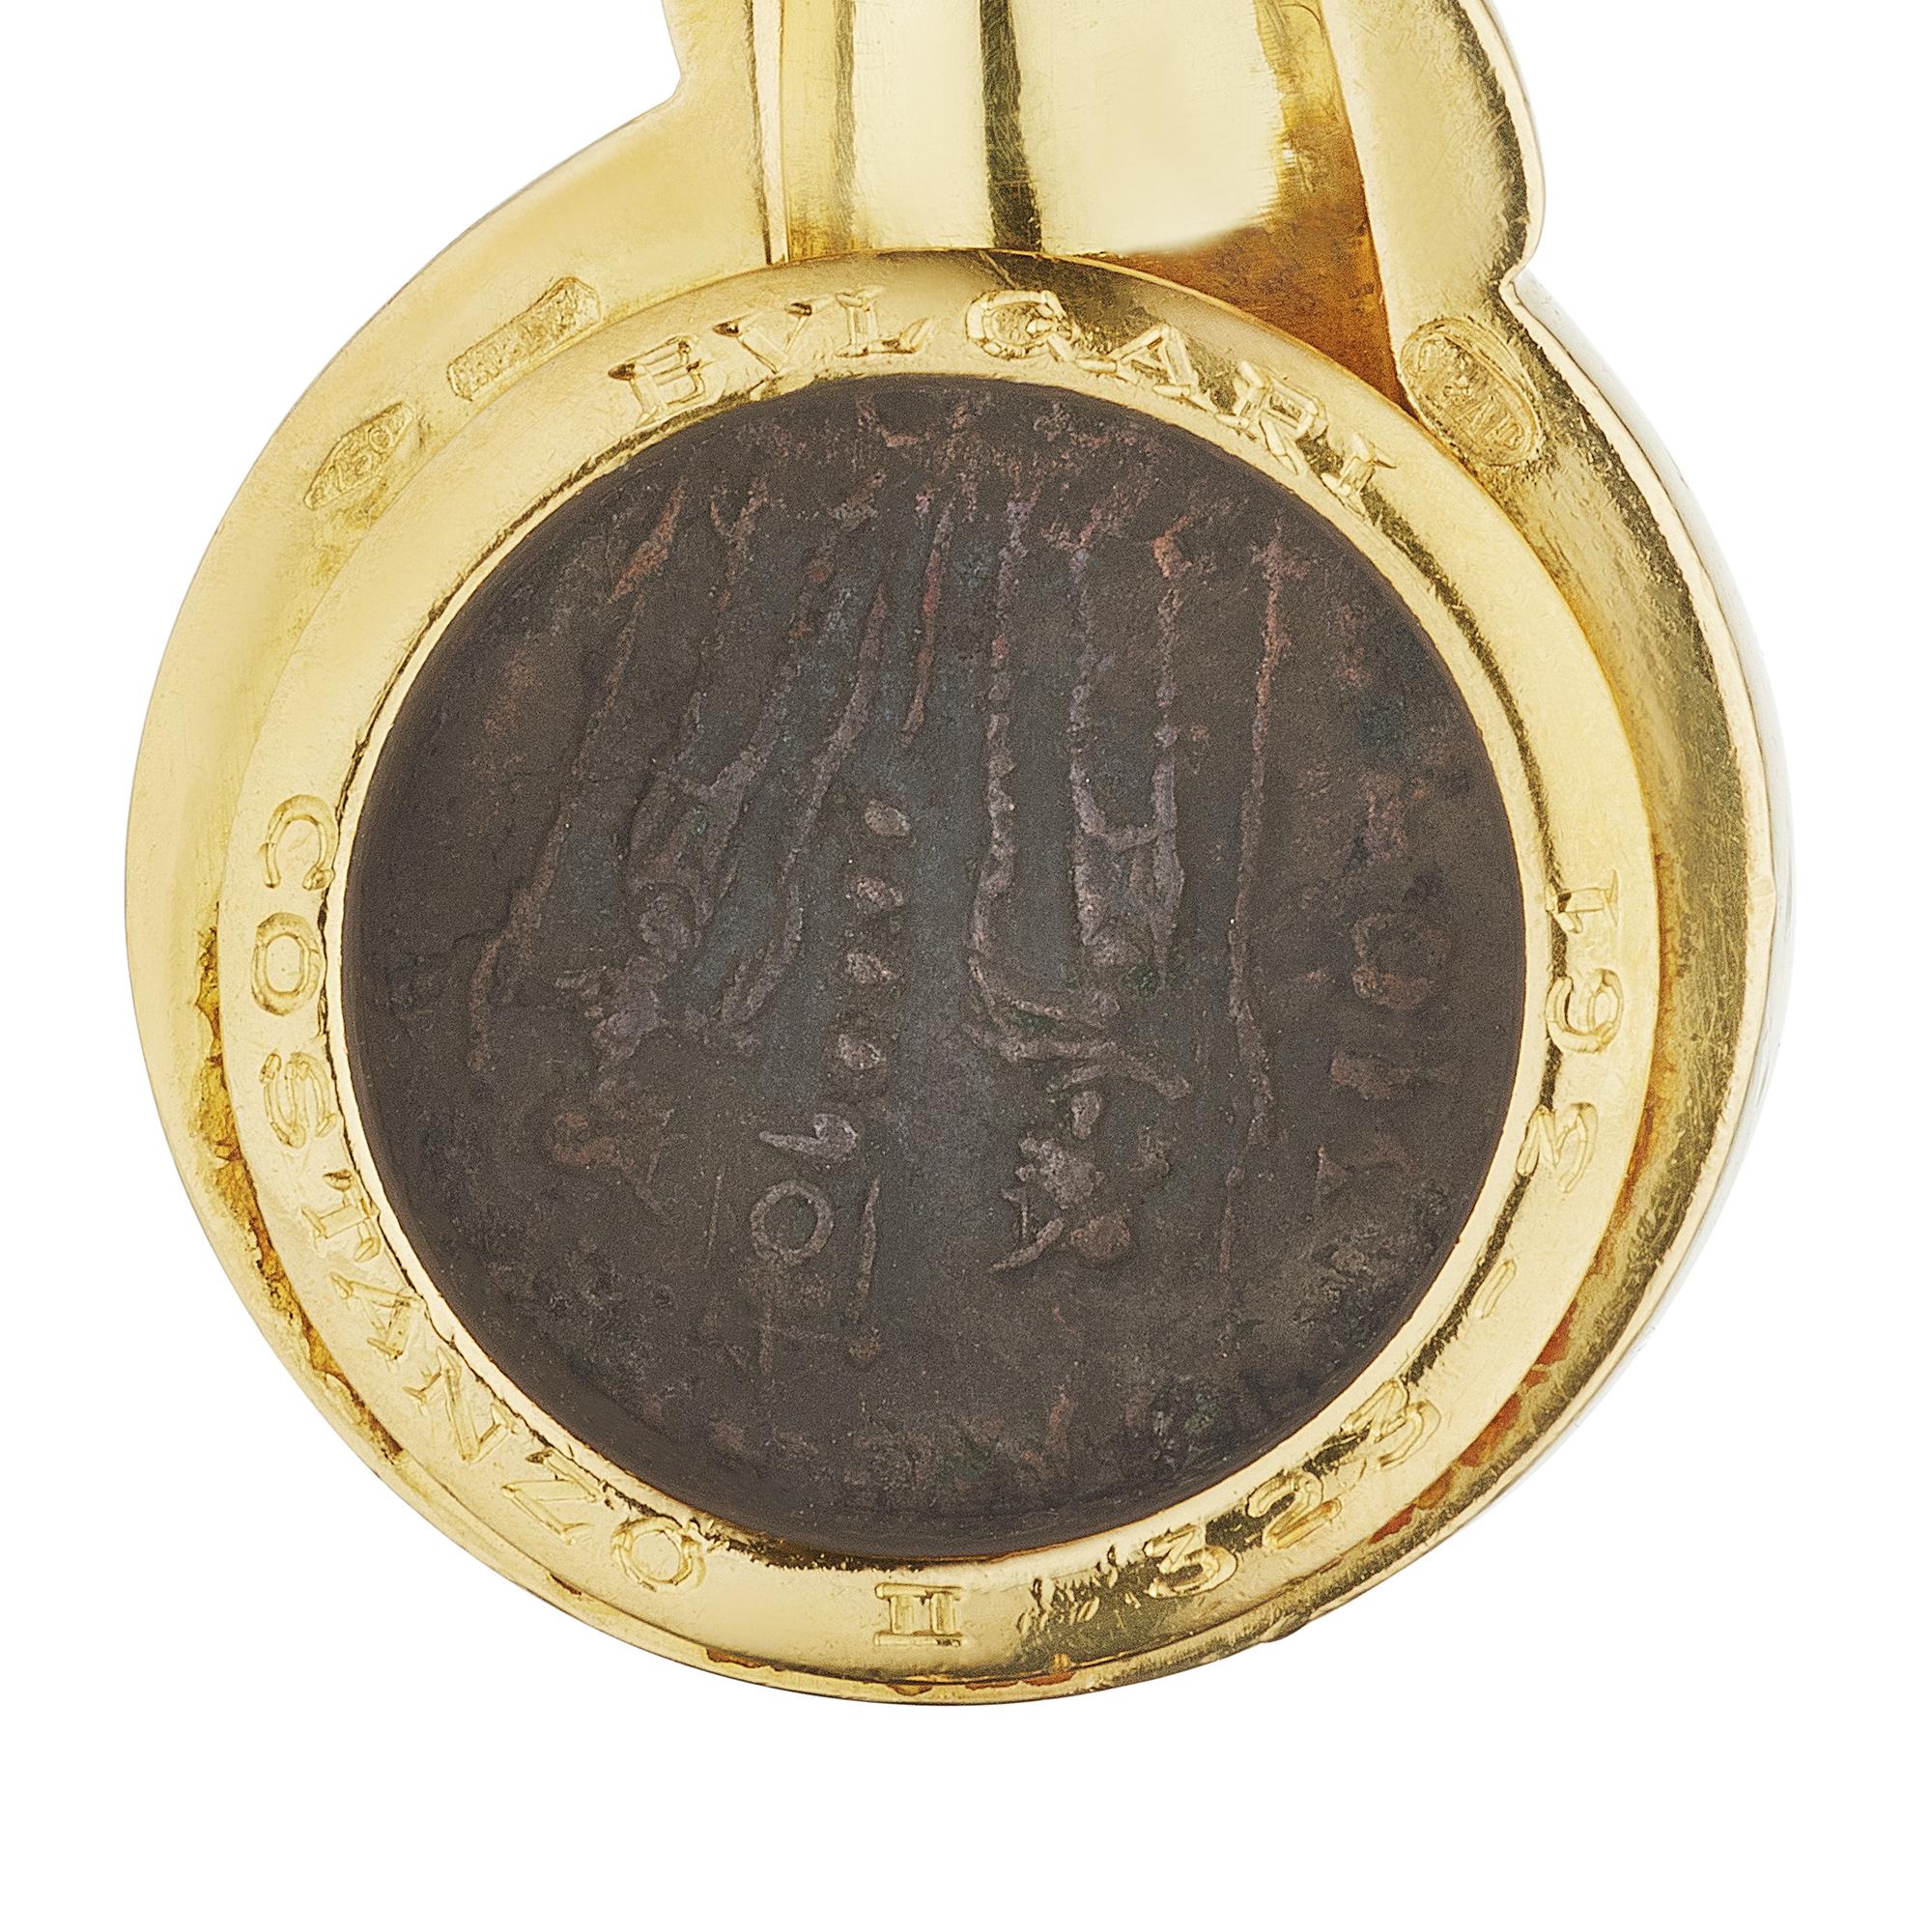 Wear a piece of the past with this Bulgari ancient bronze coin pendant necklace. With a twisted rope chain and rope framed ancient coin, this stylish pendant necklace reflects a gratefulness for the past. Circa 1980. Signed Bulgari. Stamped Costanzo